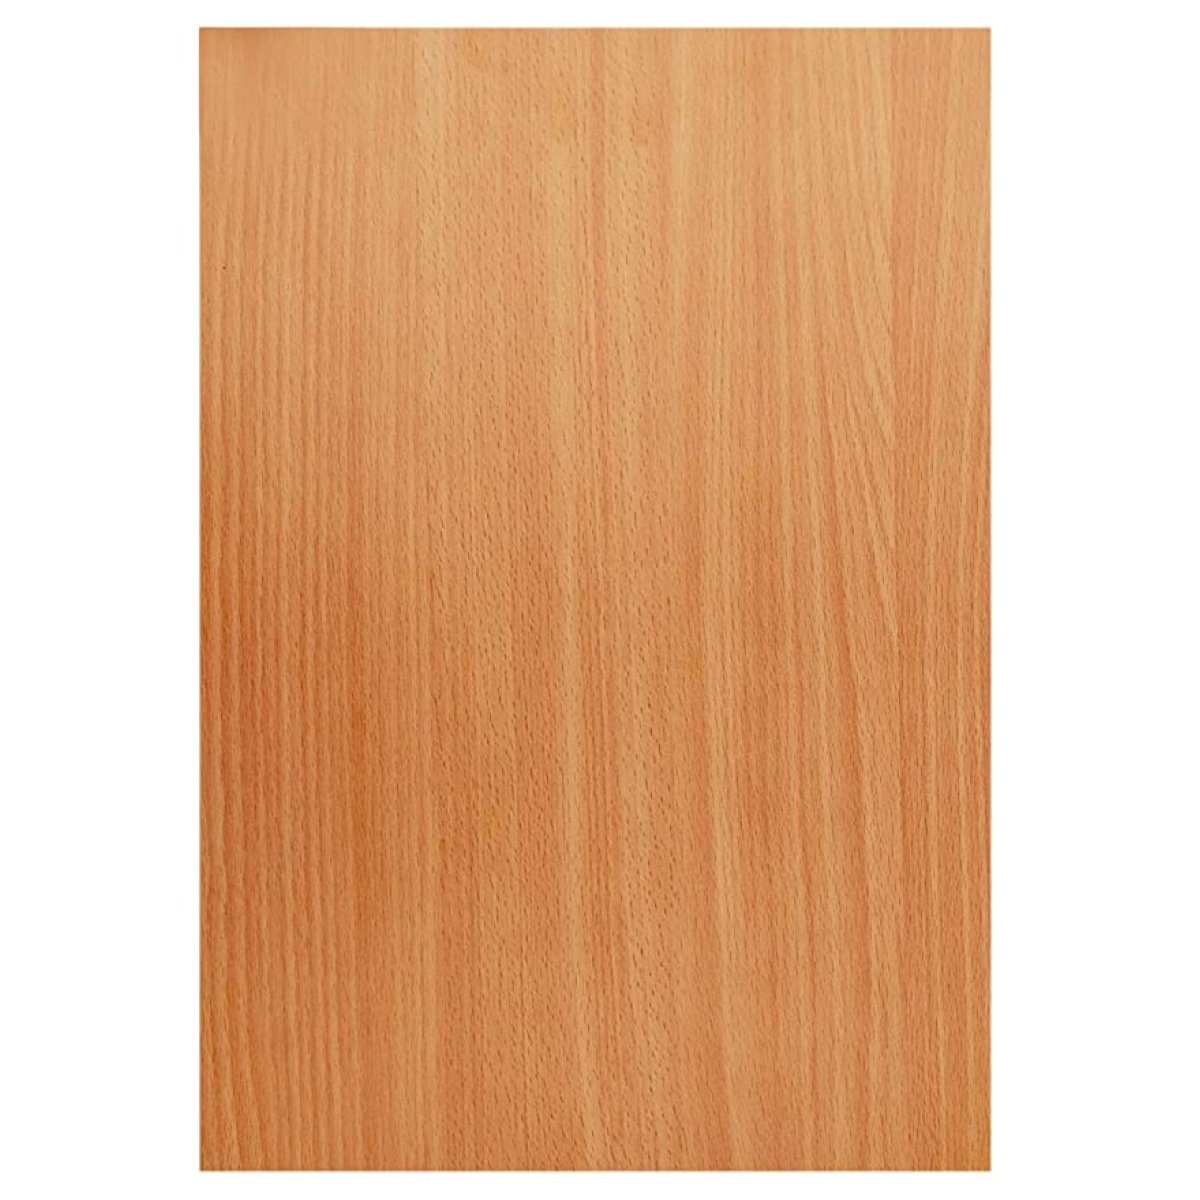 Wooden Board | A3 Size (29.7 × 42 cm) for Drawing, Writing, Reading, Architecture